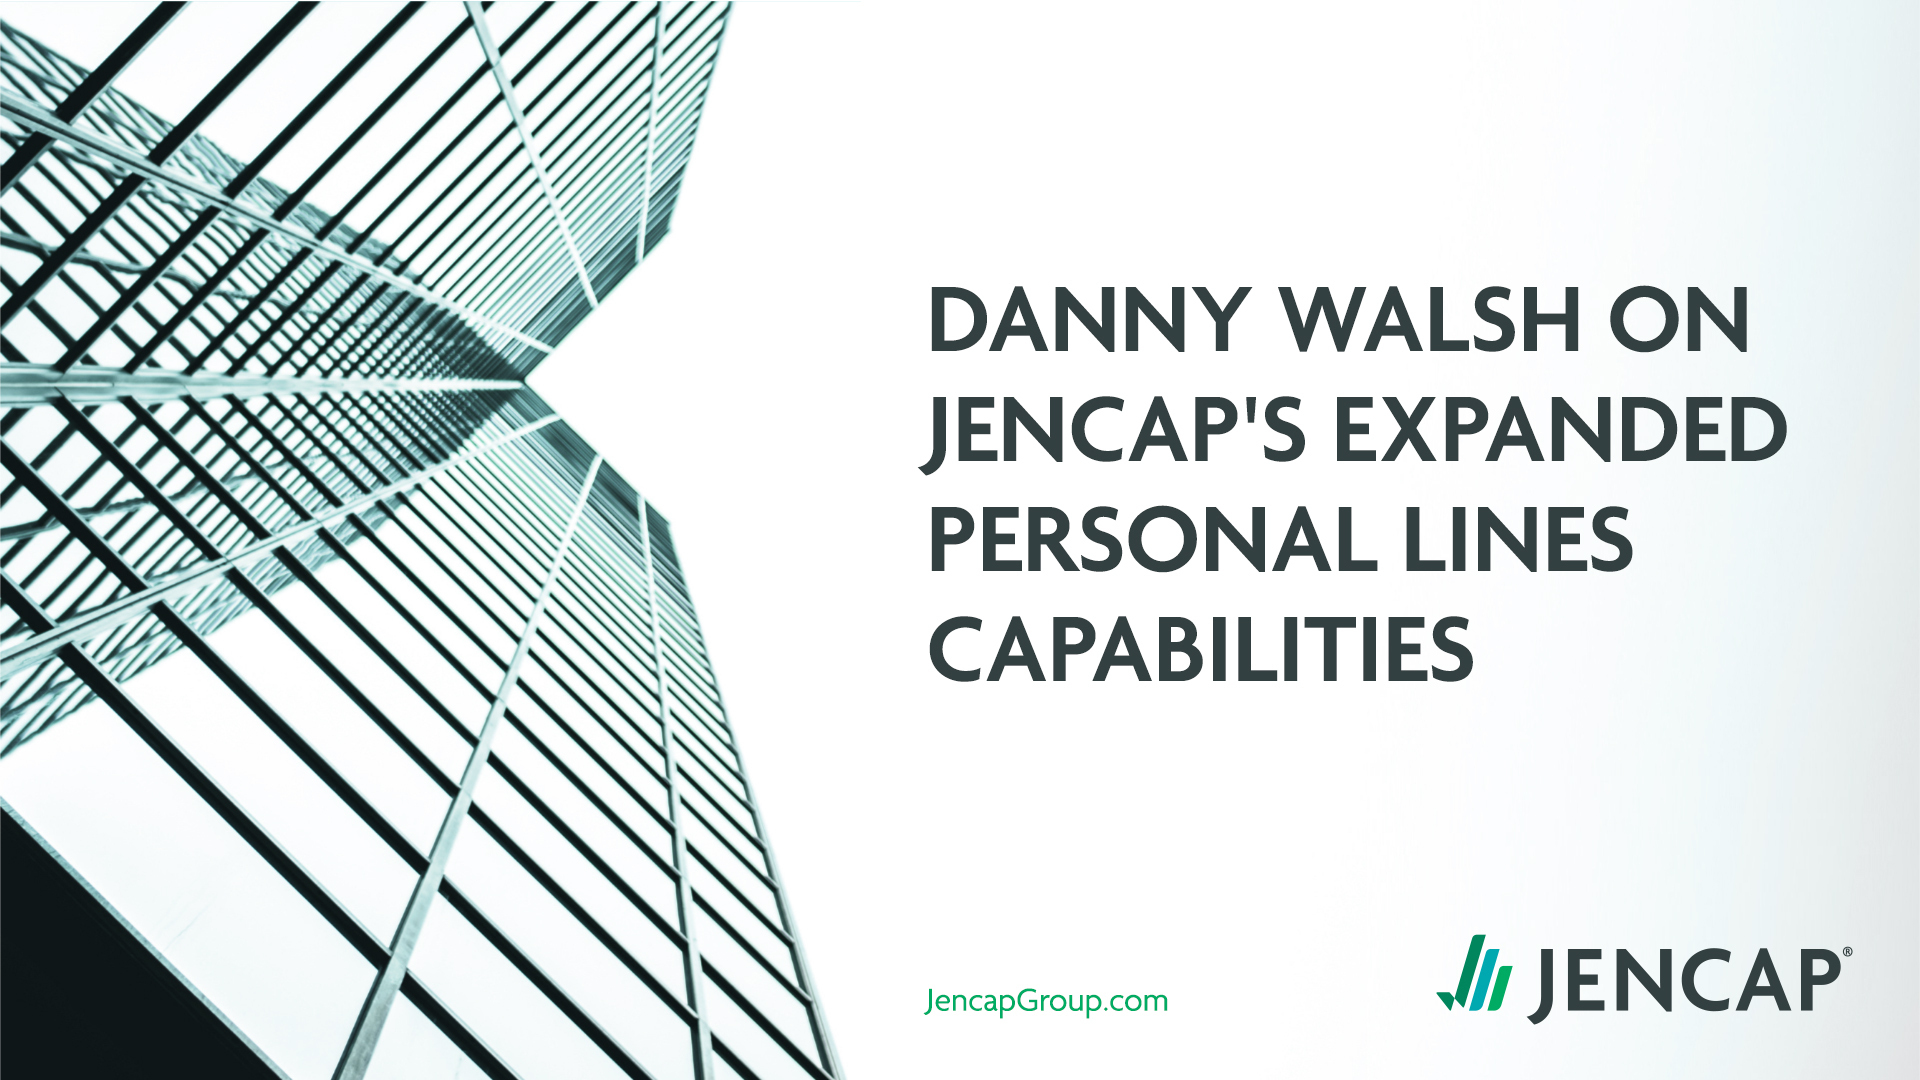 Jencap's Expanded Personal Lines Capabilities